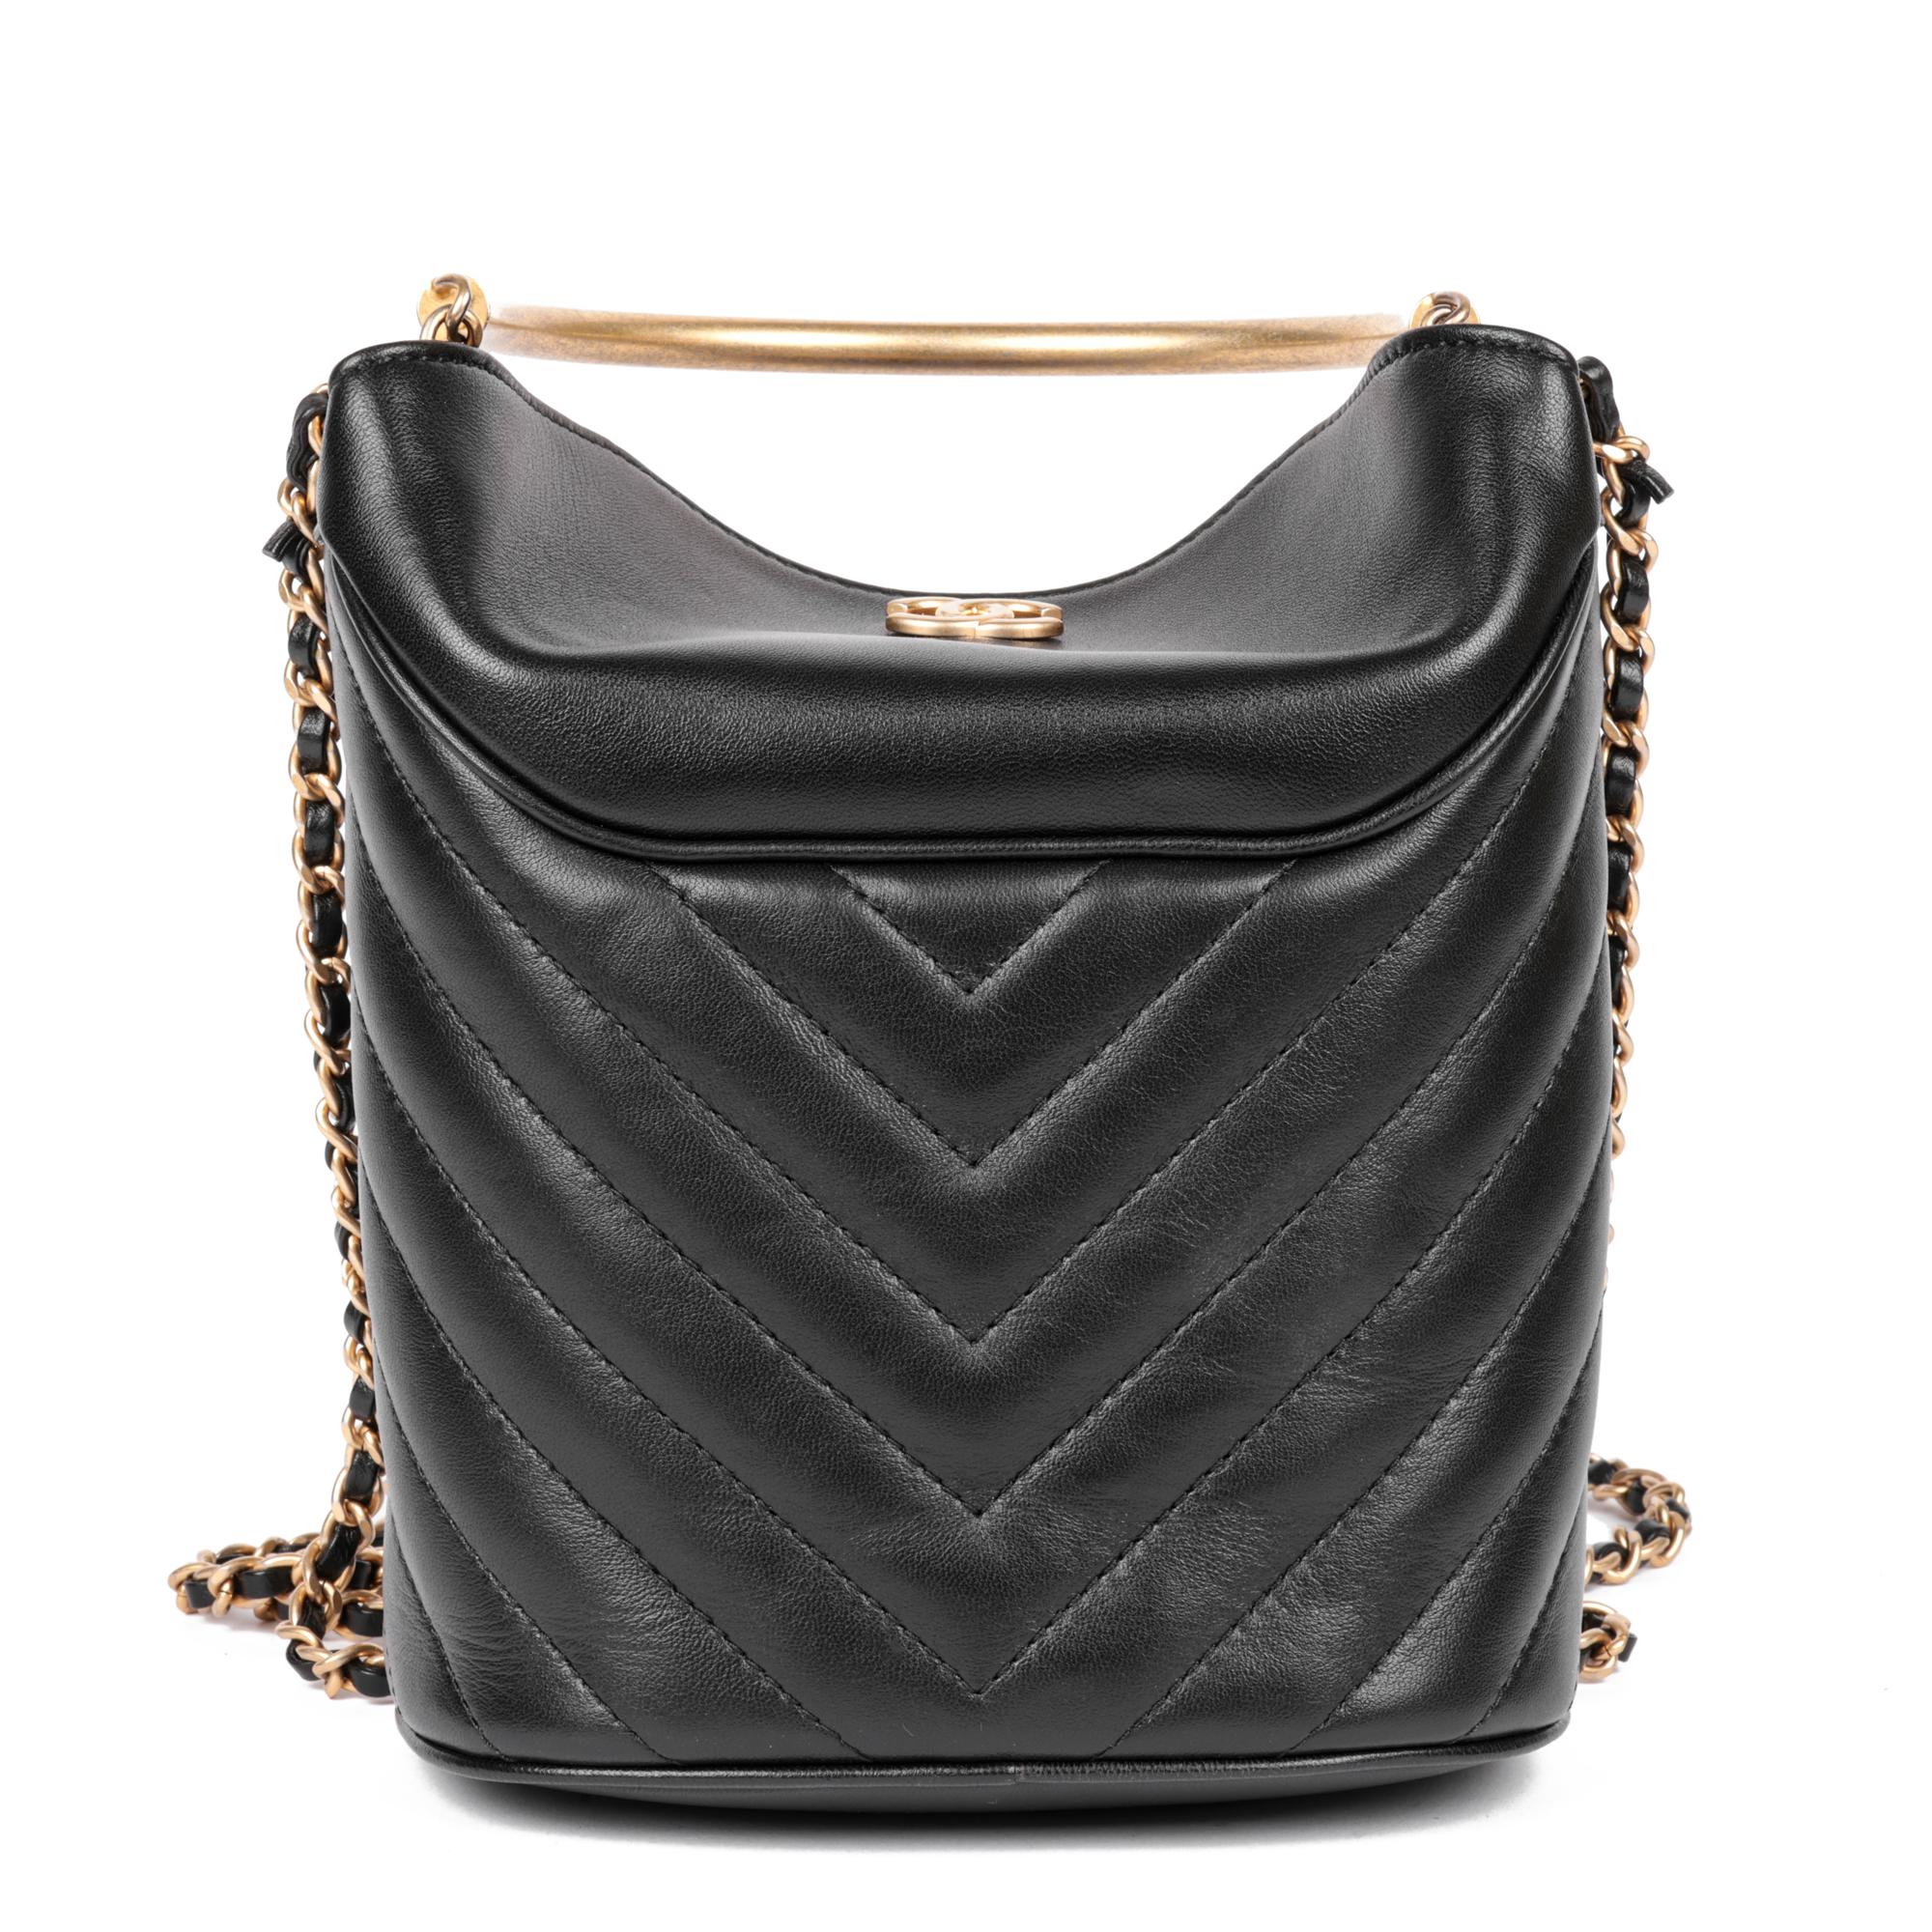 Women's CHANEL Black Chevron Quilted Lambskin Handle with Chic Bucket Bag For Sale